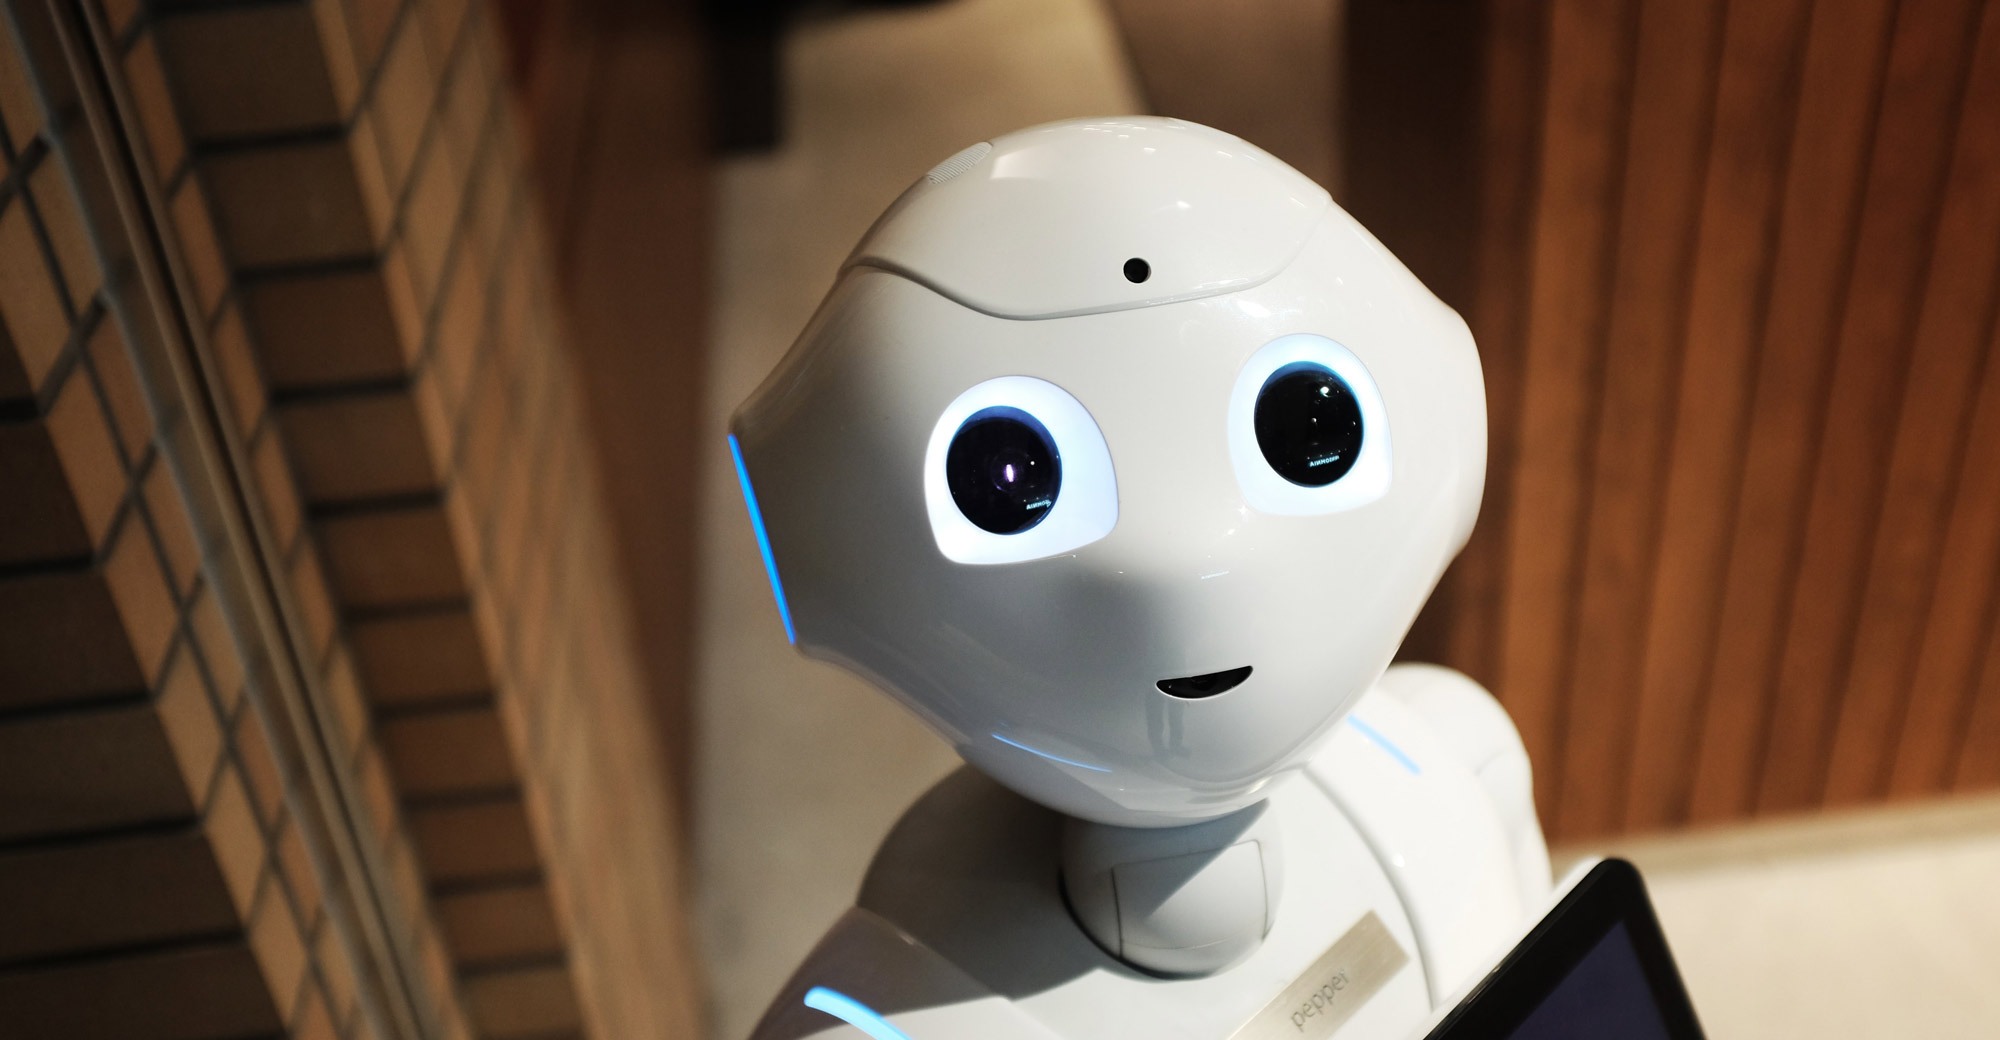 Can robots help in care homes?